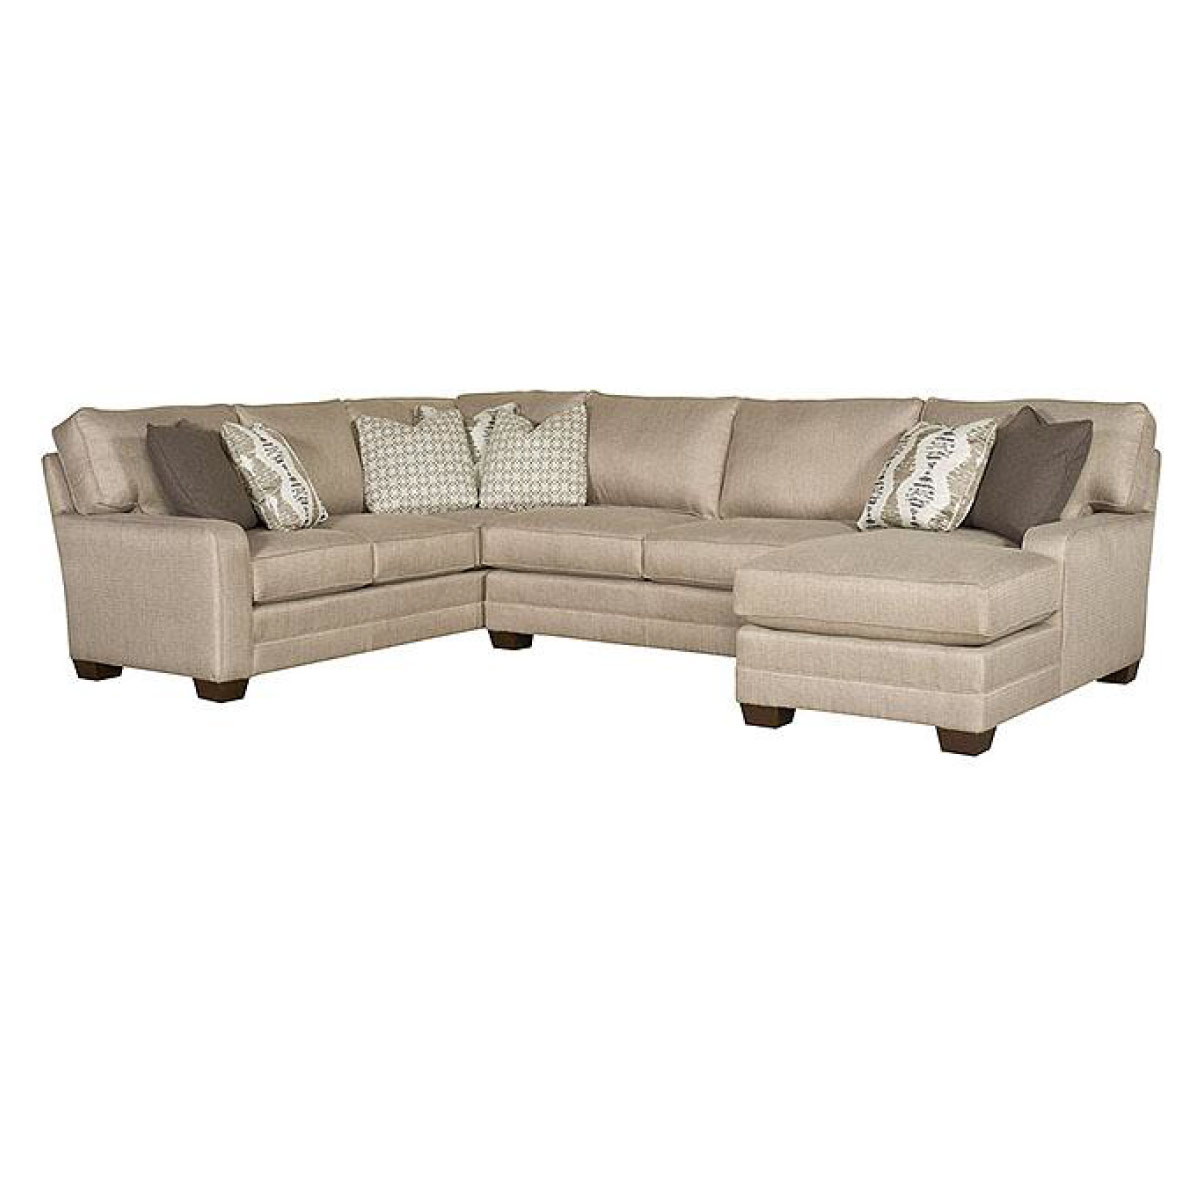 Bentley Sectional Plymouth Furniture